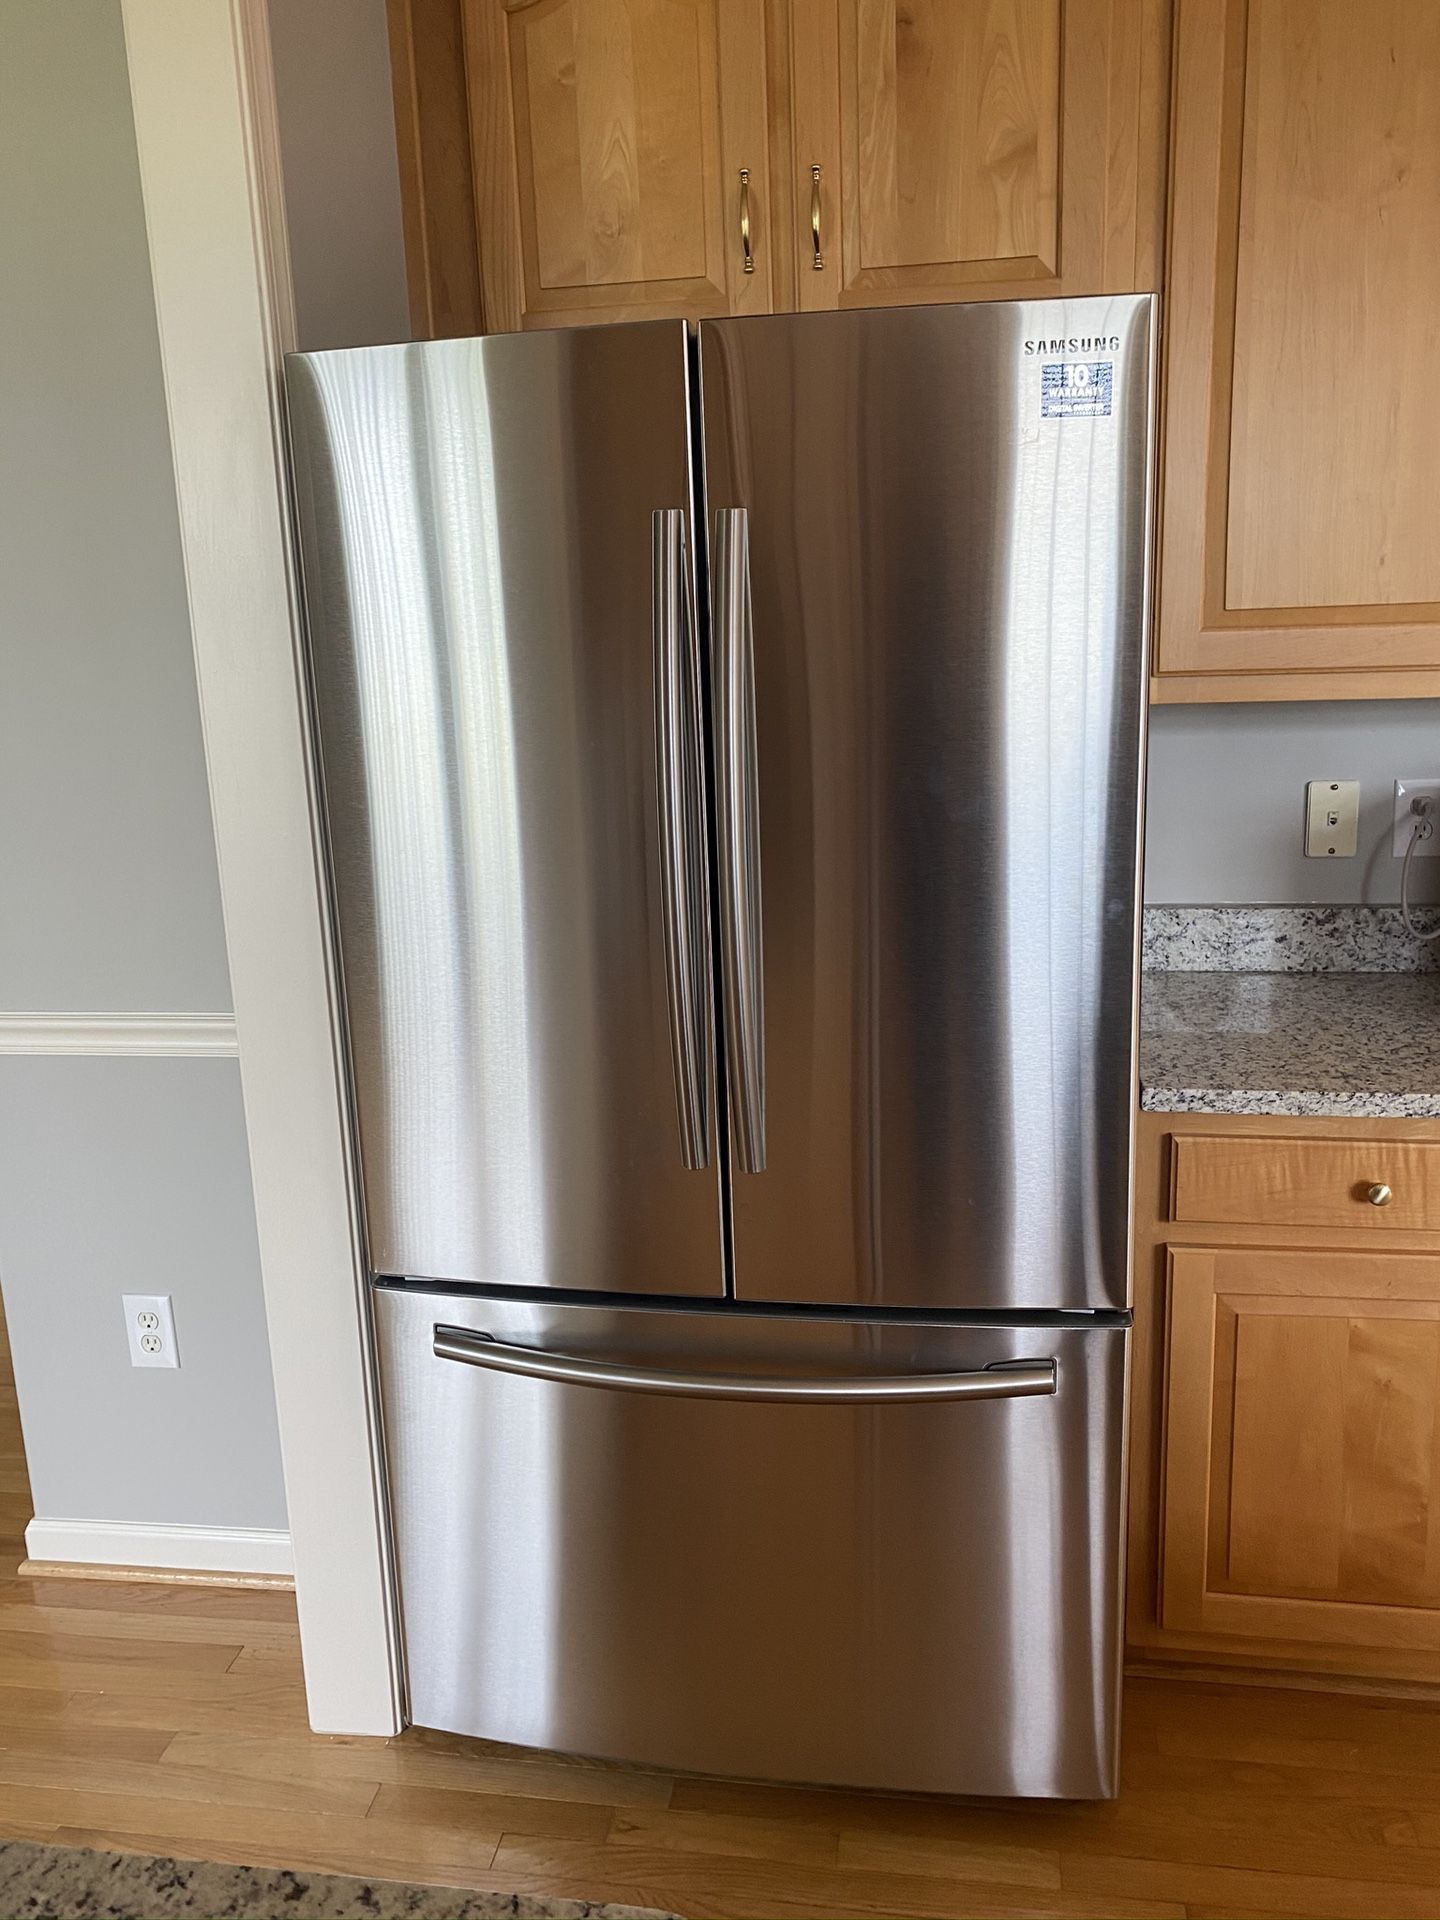 Brand new Samsung25.5 cu. ft. French Door Refrigerator with Internal Water Dispenser in Stainless Steel